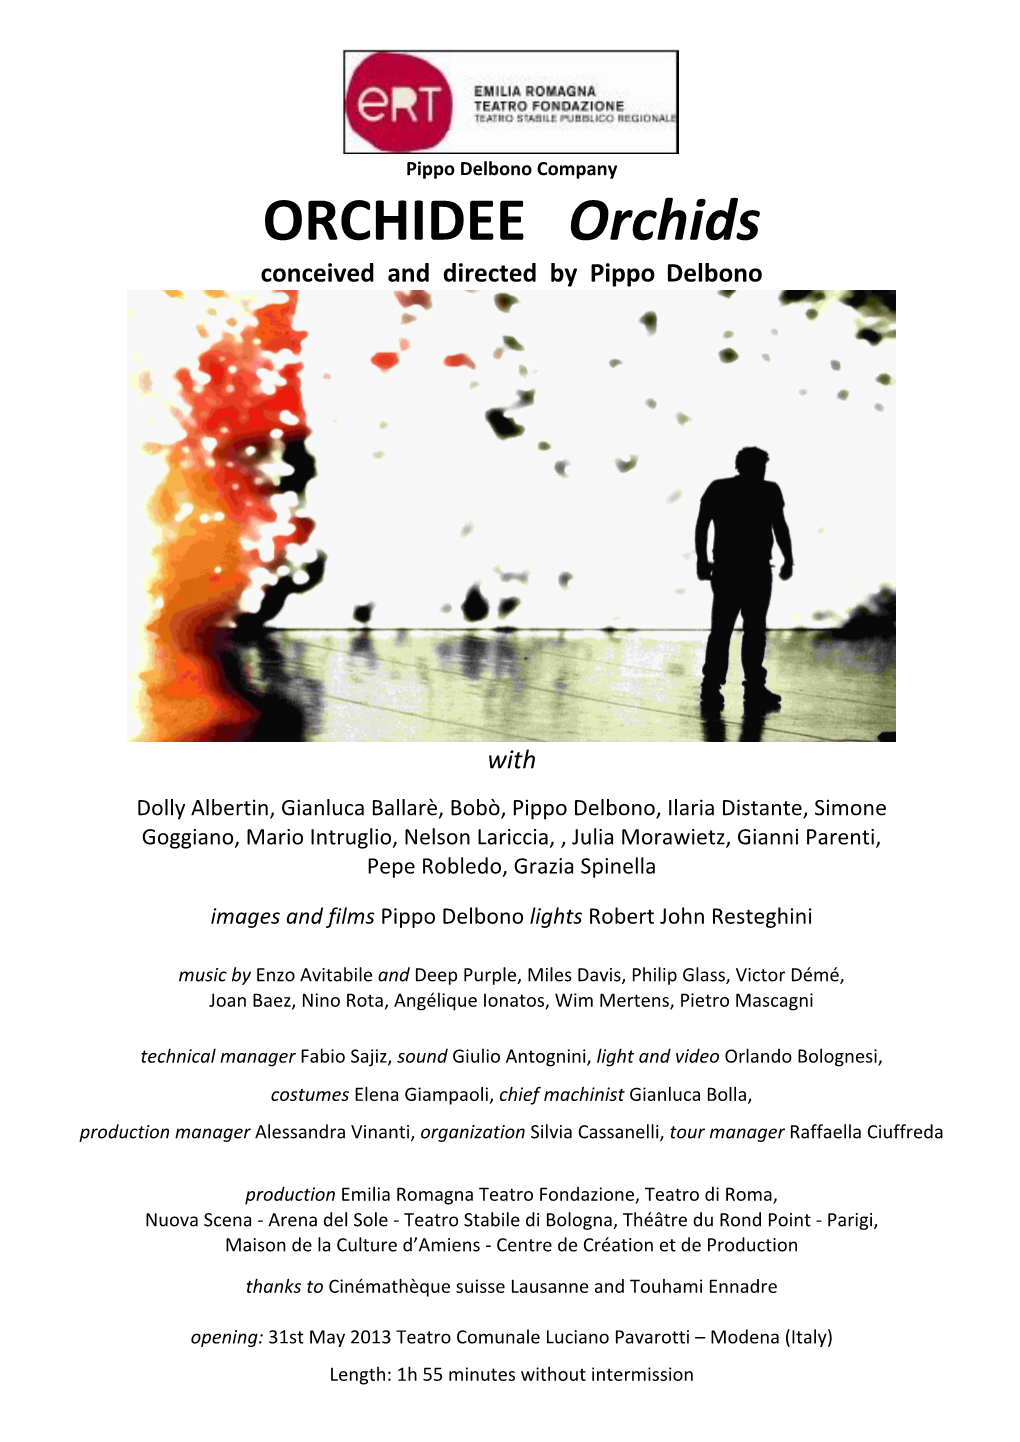 ORCHIDEE Credits and Programme